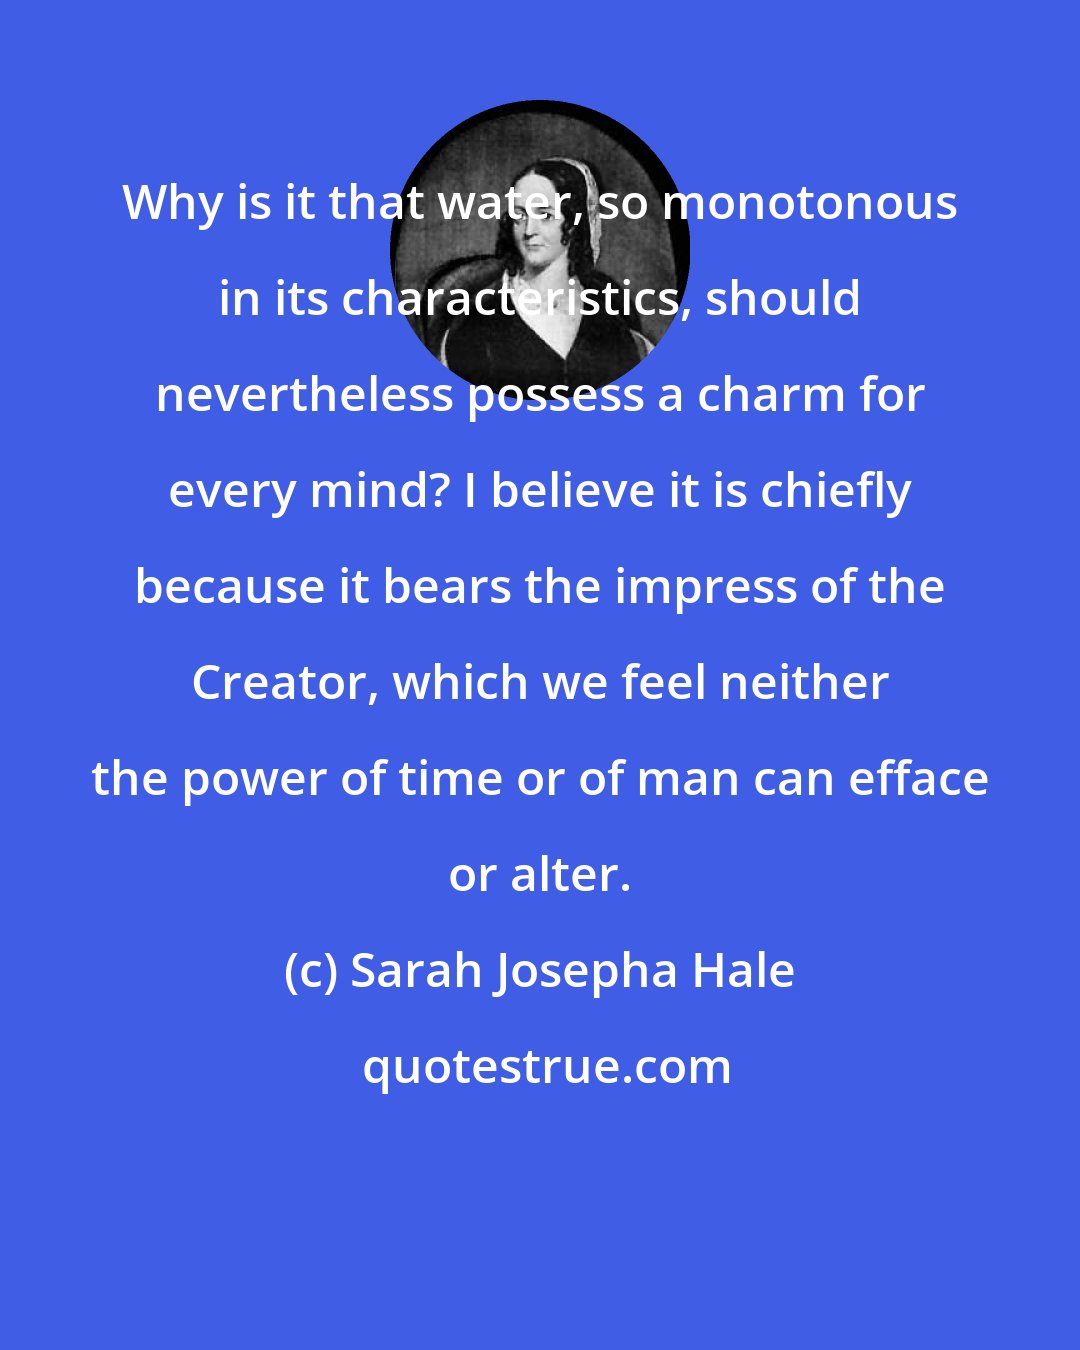 Sarah Josepha Hale: Why is it that water, so monotonous in its characteristics, should nevertheless possess a charm for every mind? I believe it is chiefly because it bears the impress of the Creator, which we feel neither the power of time or of man can efface or alter.